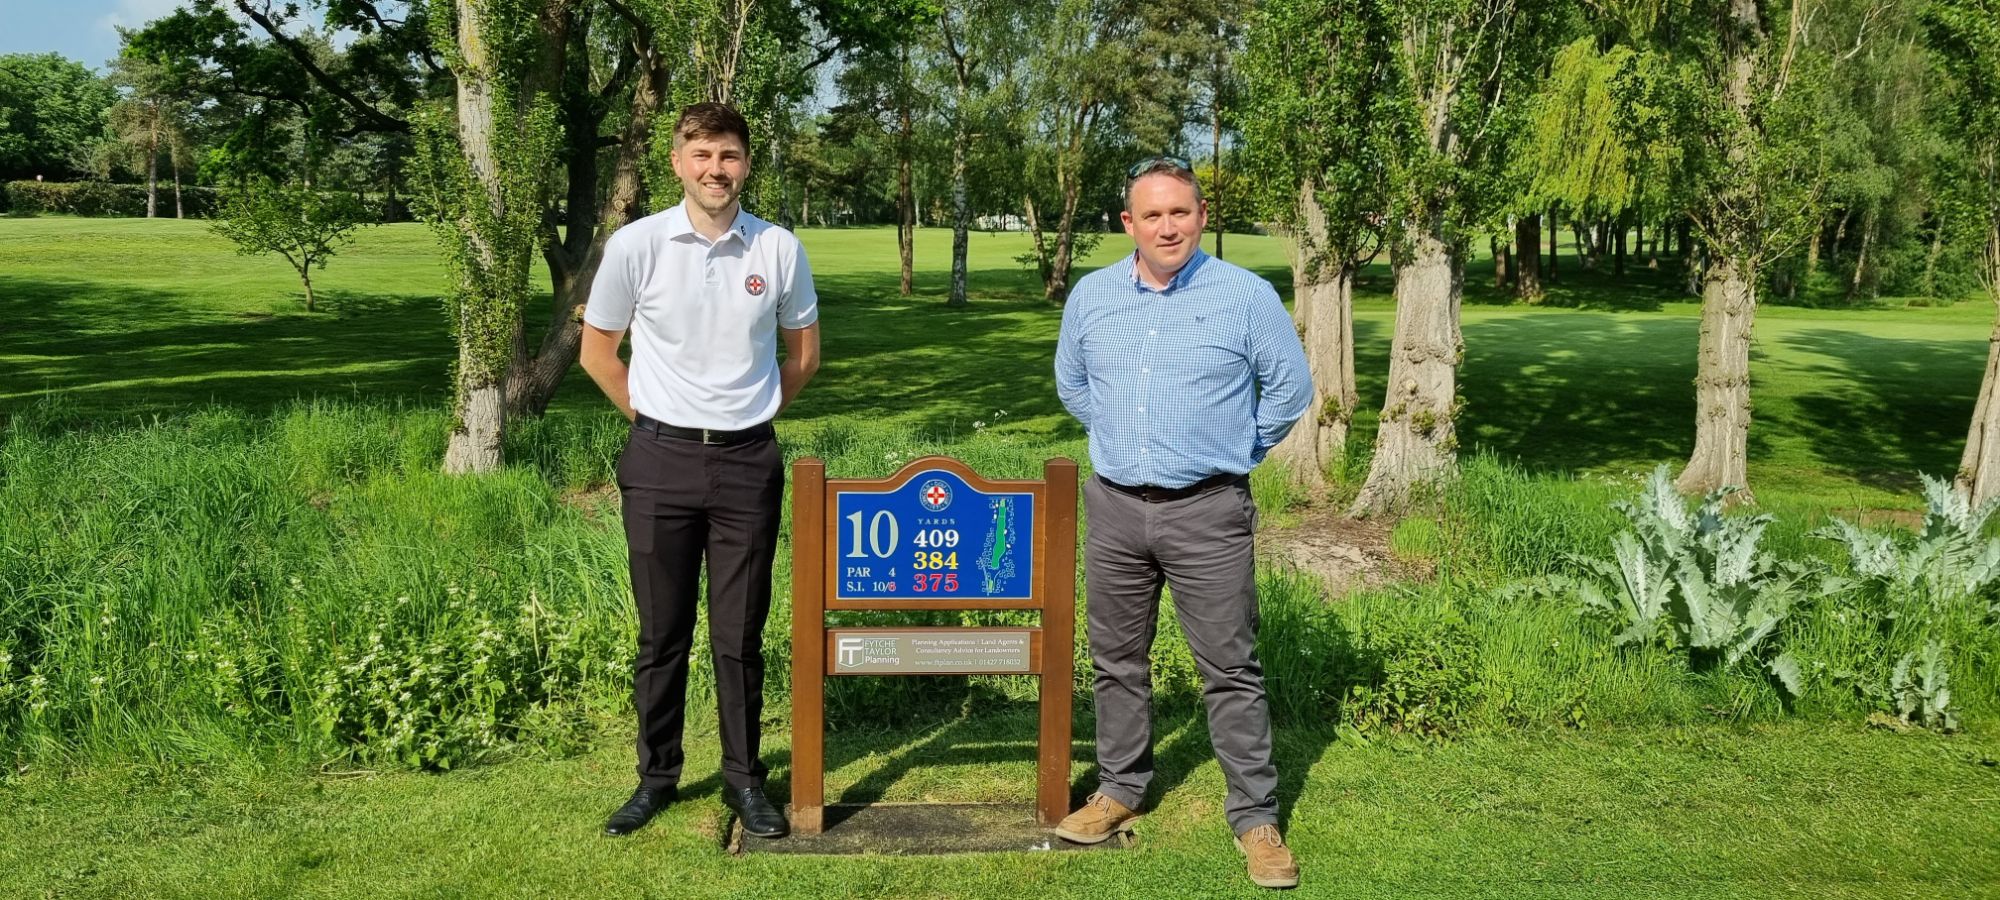 New Sponsorship Deal Announced at Lincoln Golf Club - Fytche-Taylor Planning Ltd Managing Director Oliver Fytche-Taylor with club manager Louis Booth